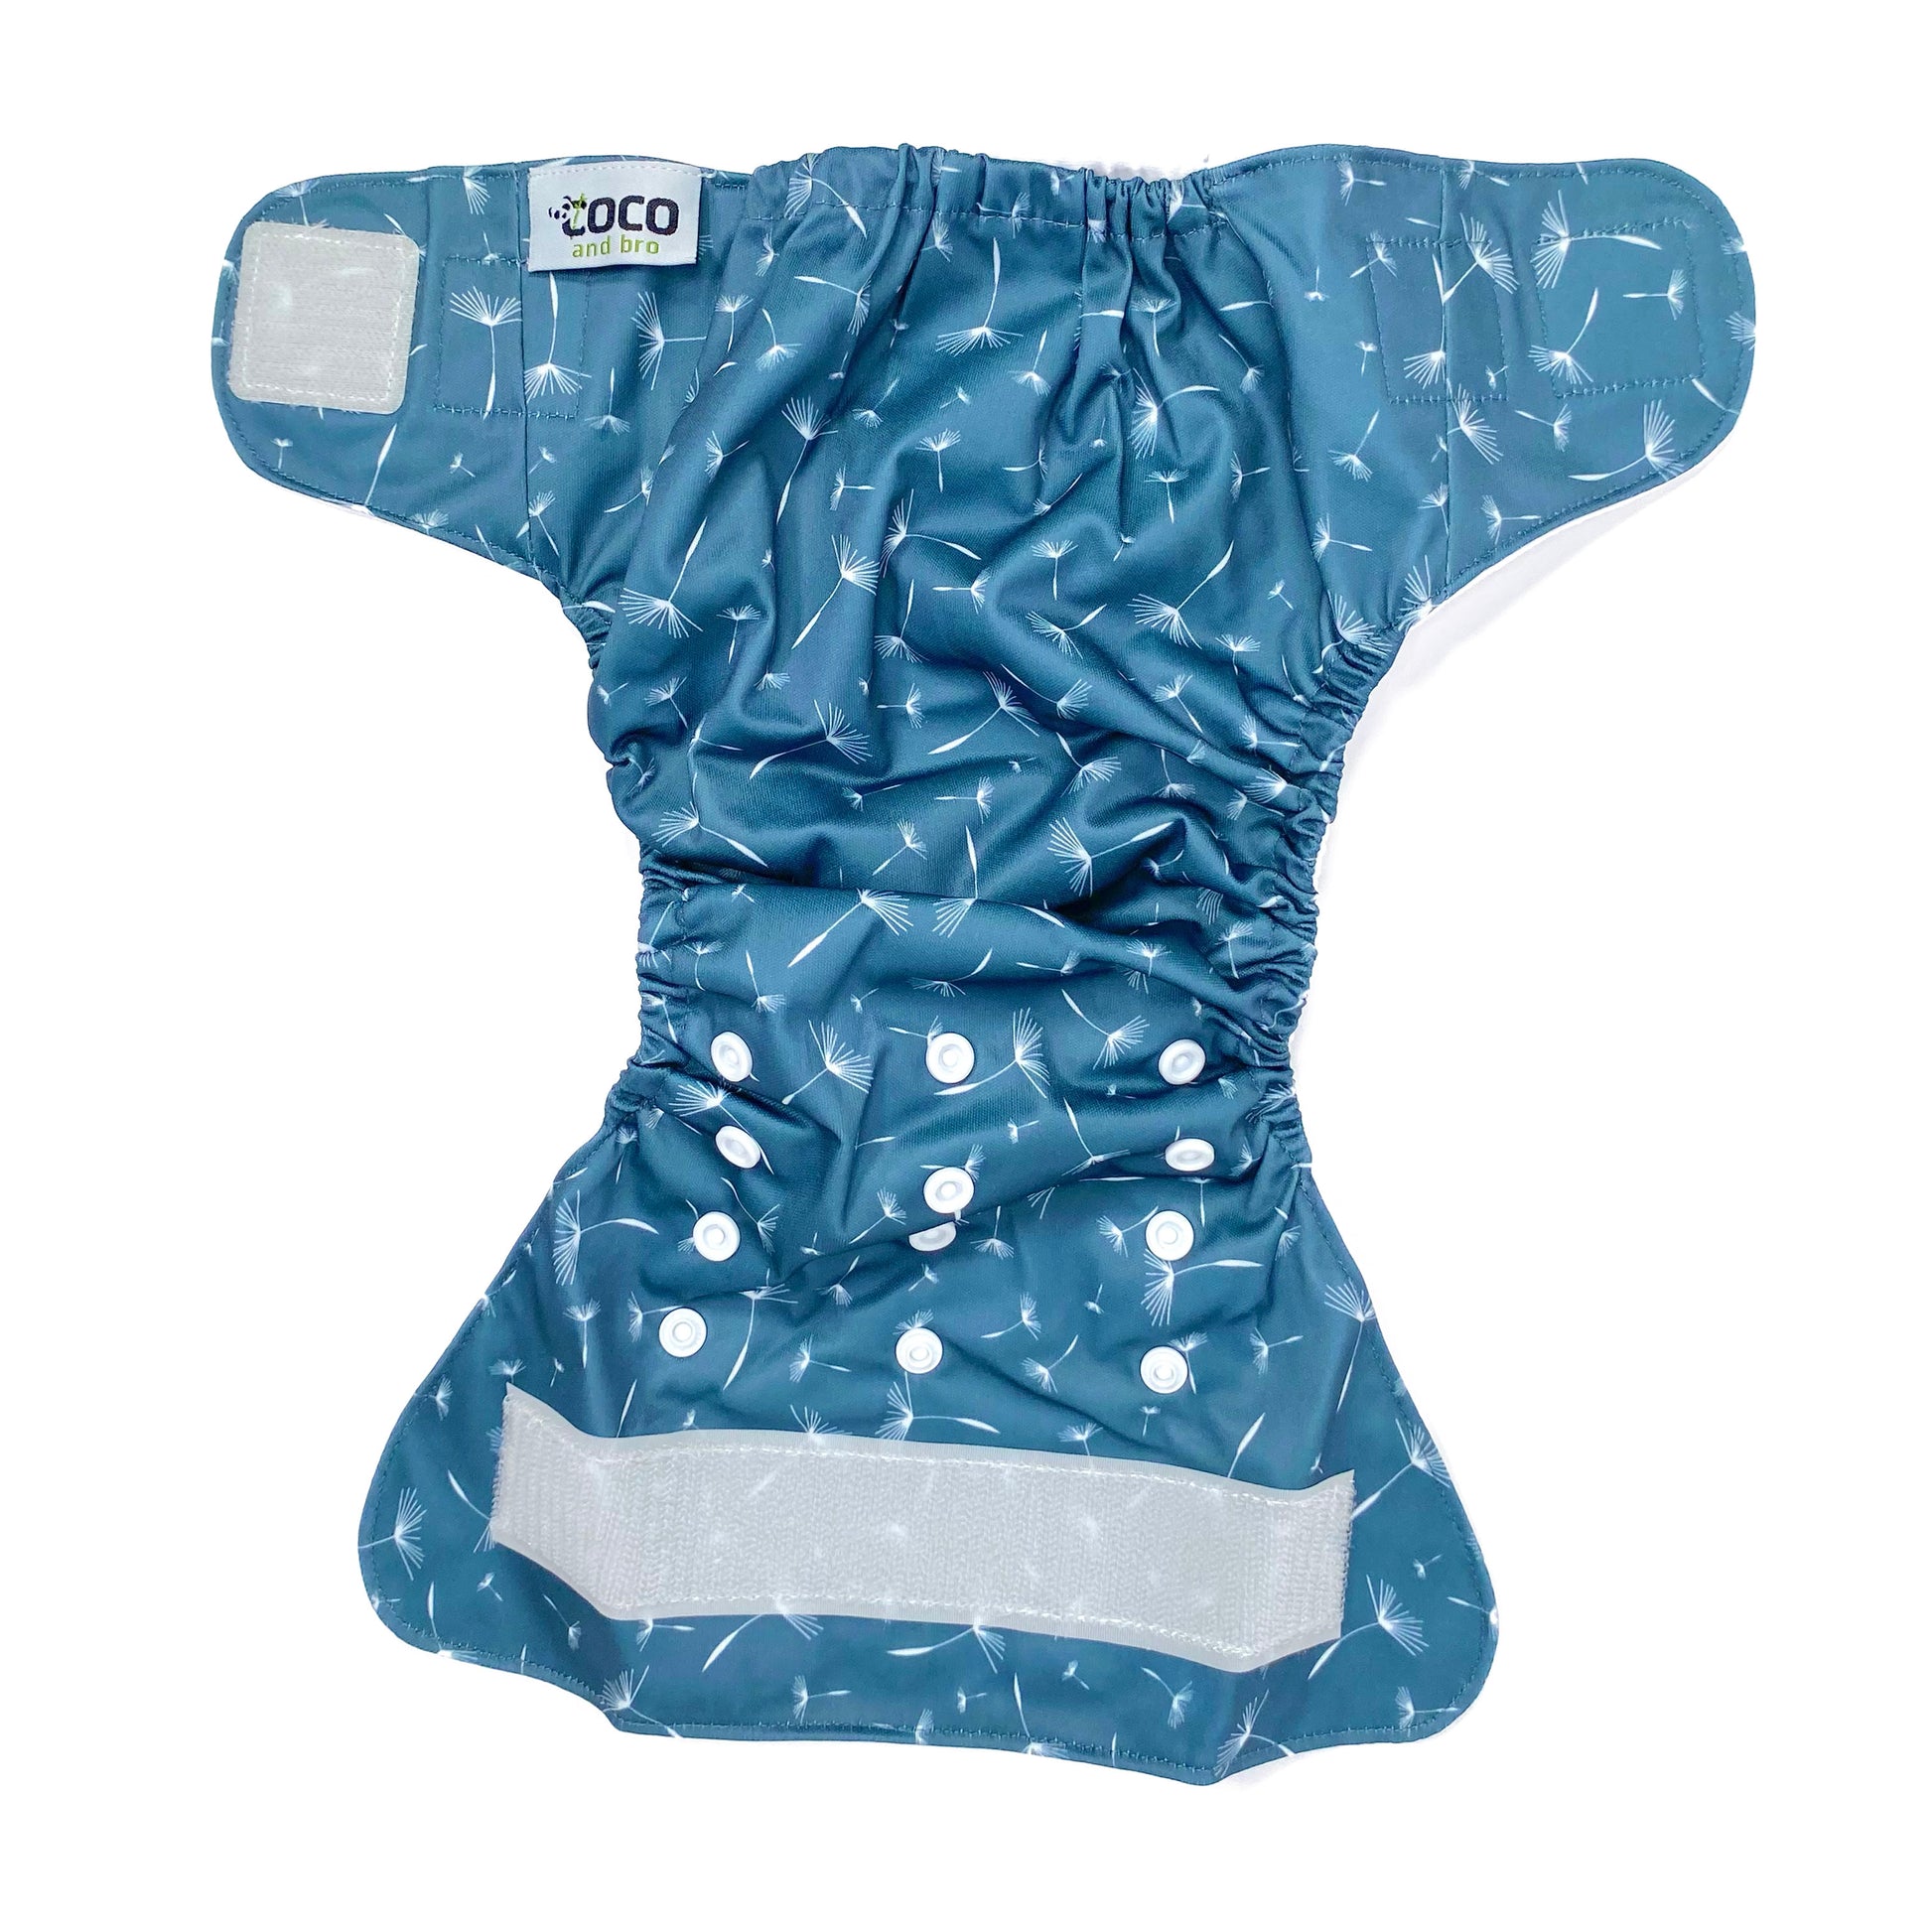 An adjustable reusable nappy for babies and toddlers, featuring a midnight breeze design, with images of dandelion seeds on a navy blue background. View shows the full outside pattern of the nappy, with fastenings open.